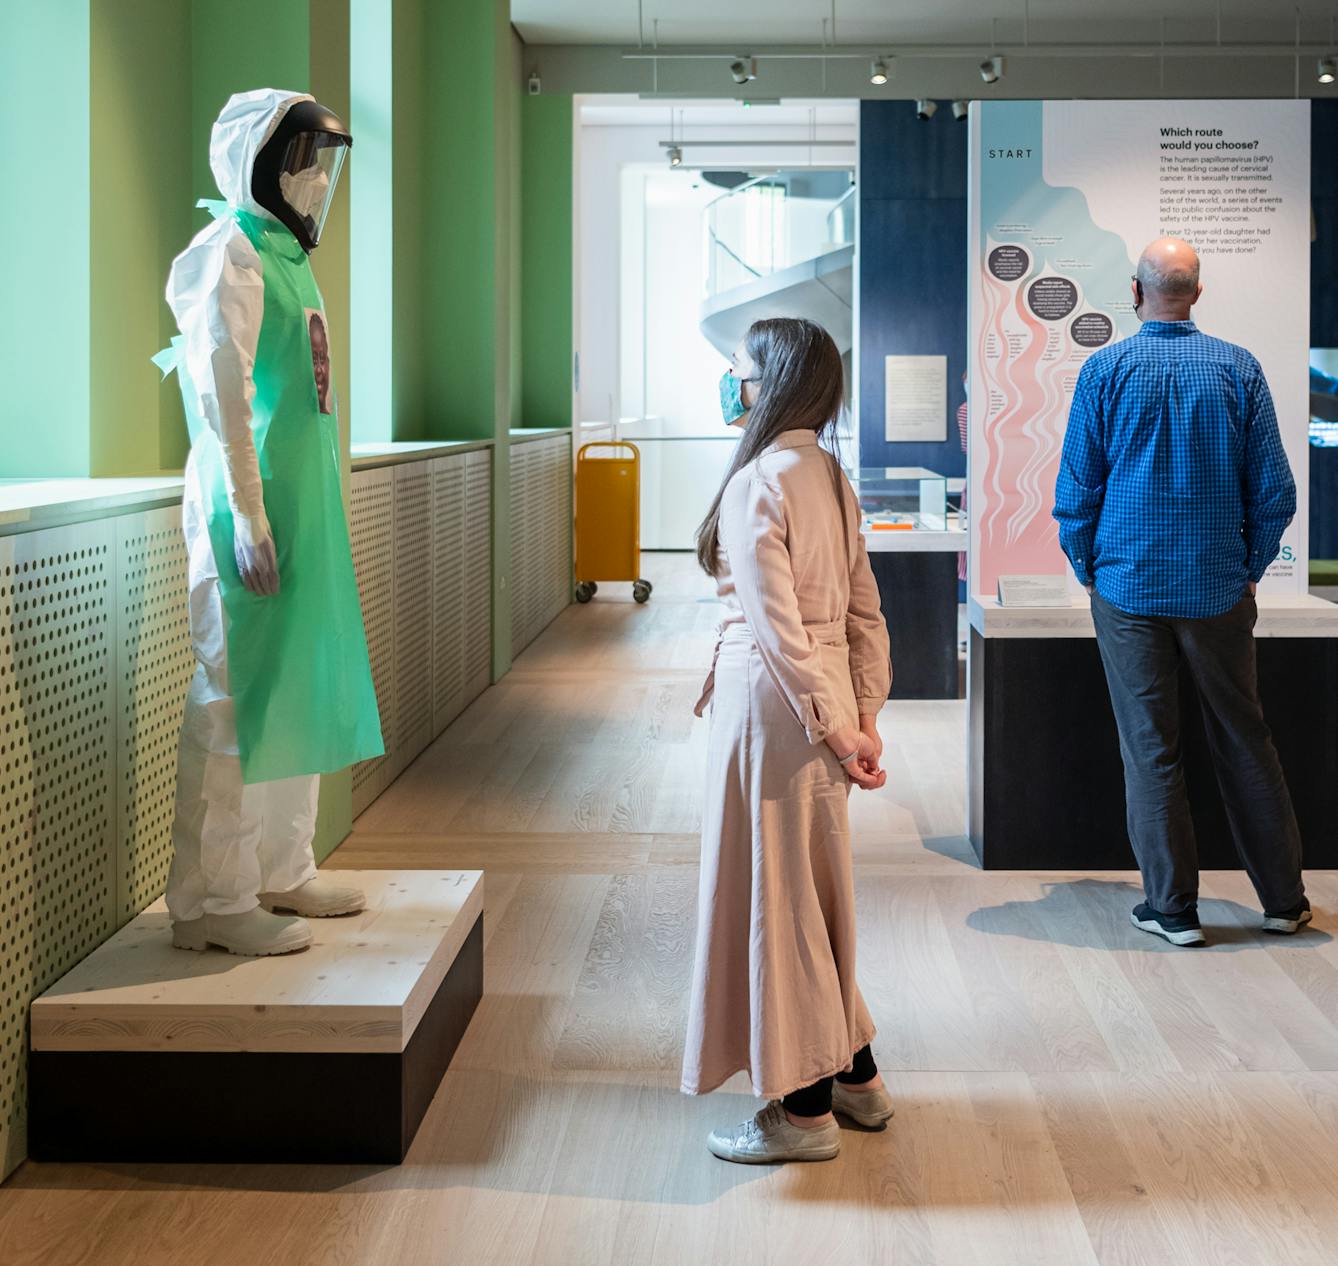 A photograph showing a visitor looking at an exhibition exhibit of a mannequin wearing a white hazmat suit, visor and green apron standing on a low wooden platform. On the green apron there is a portrait of the carer that would have been wearing the suit whilst treating Ebola patients. To the right is the back of another visitor who is looking at a different exhibit.